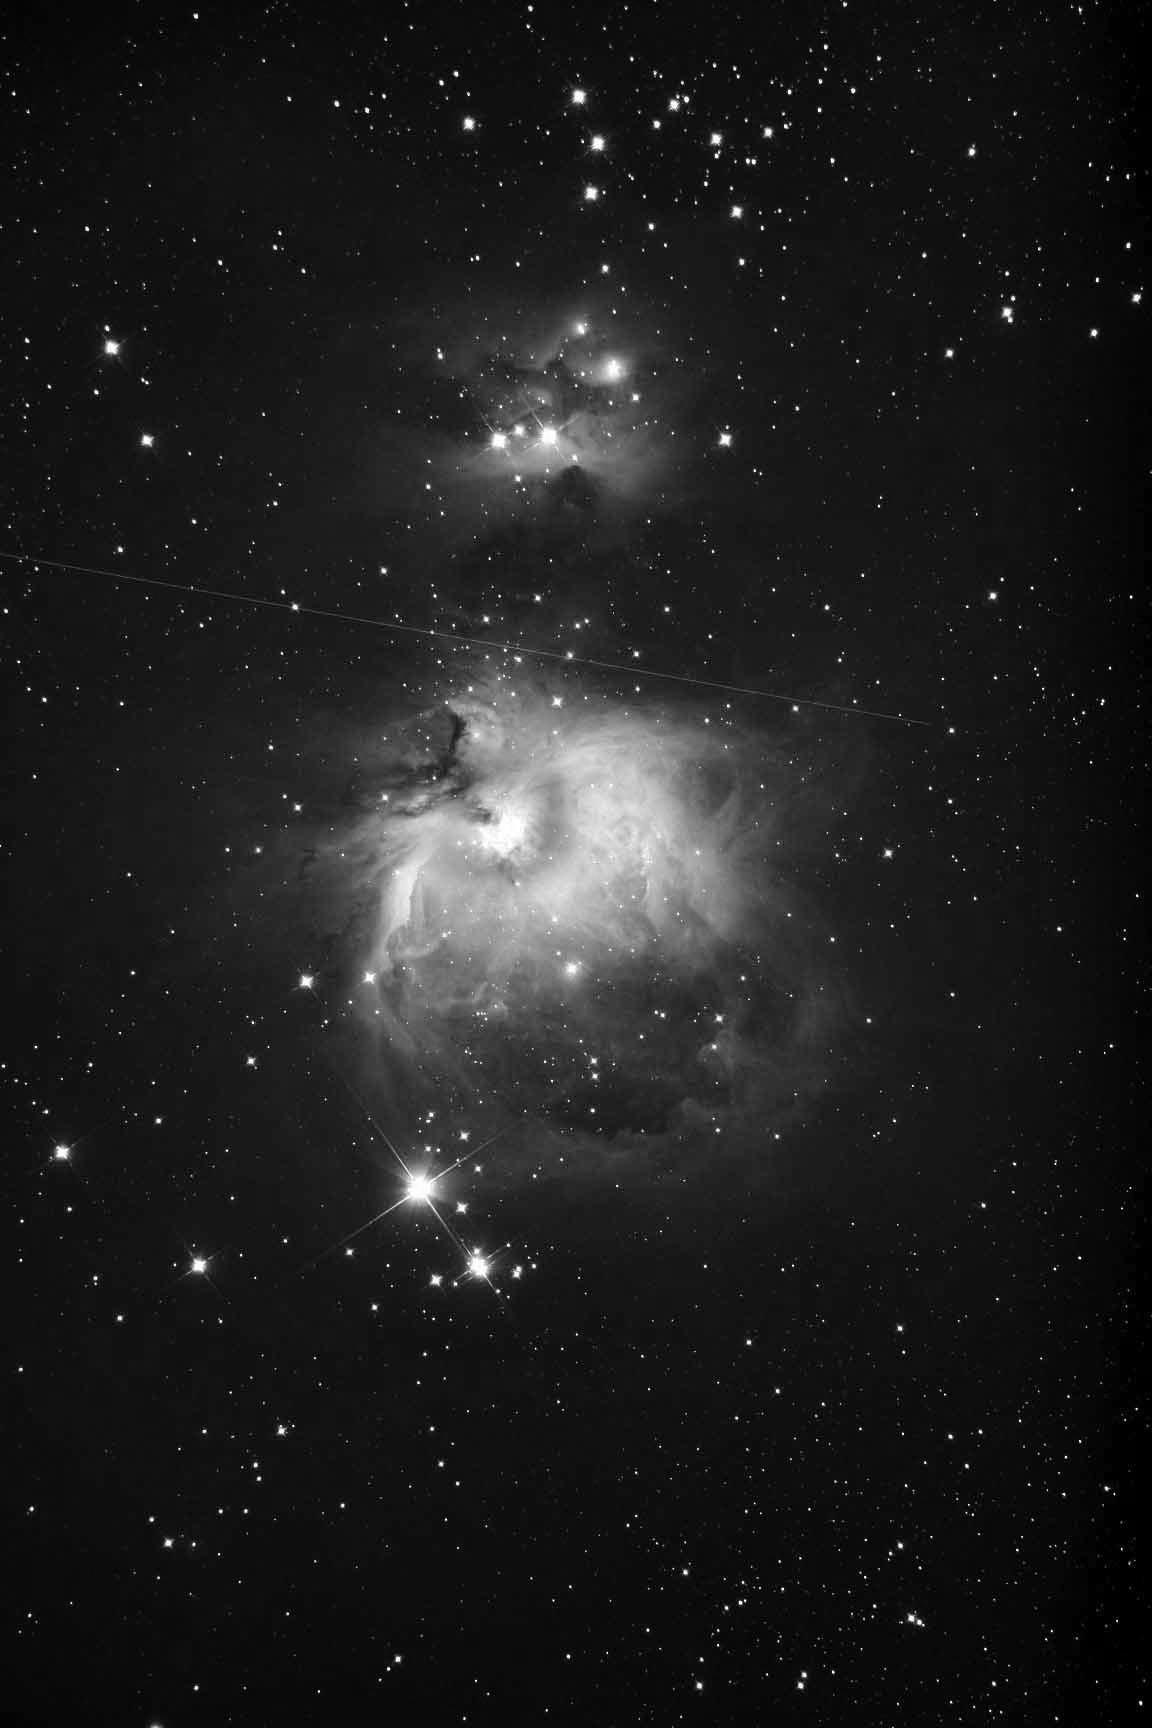 Exploring the Orion Nebula: Excerpt from 'See It With A Small Telescope